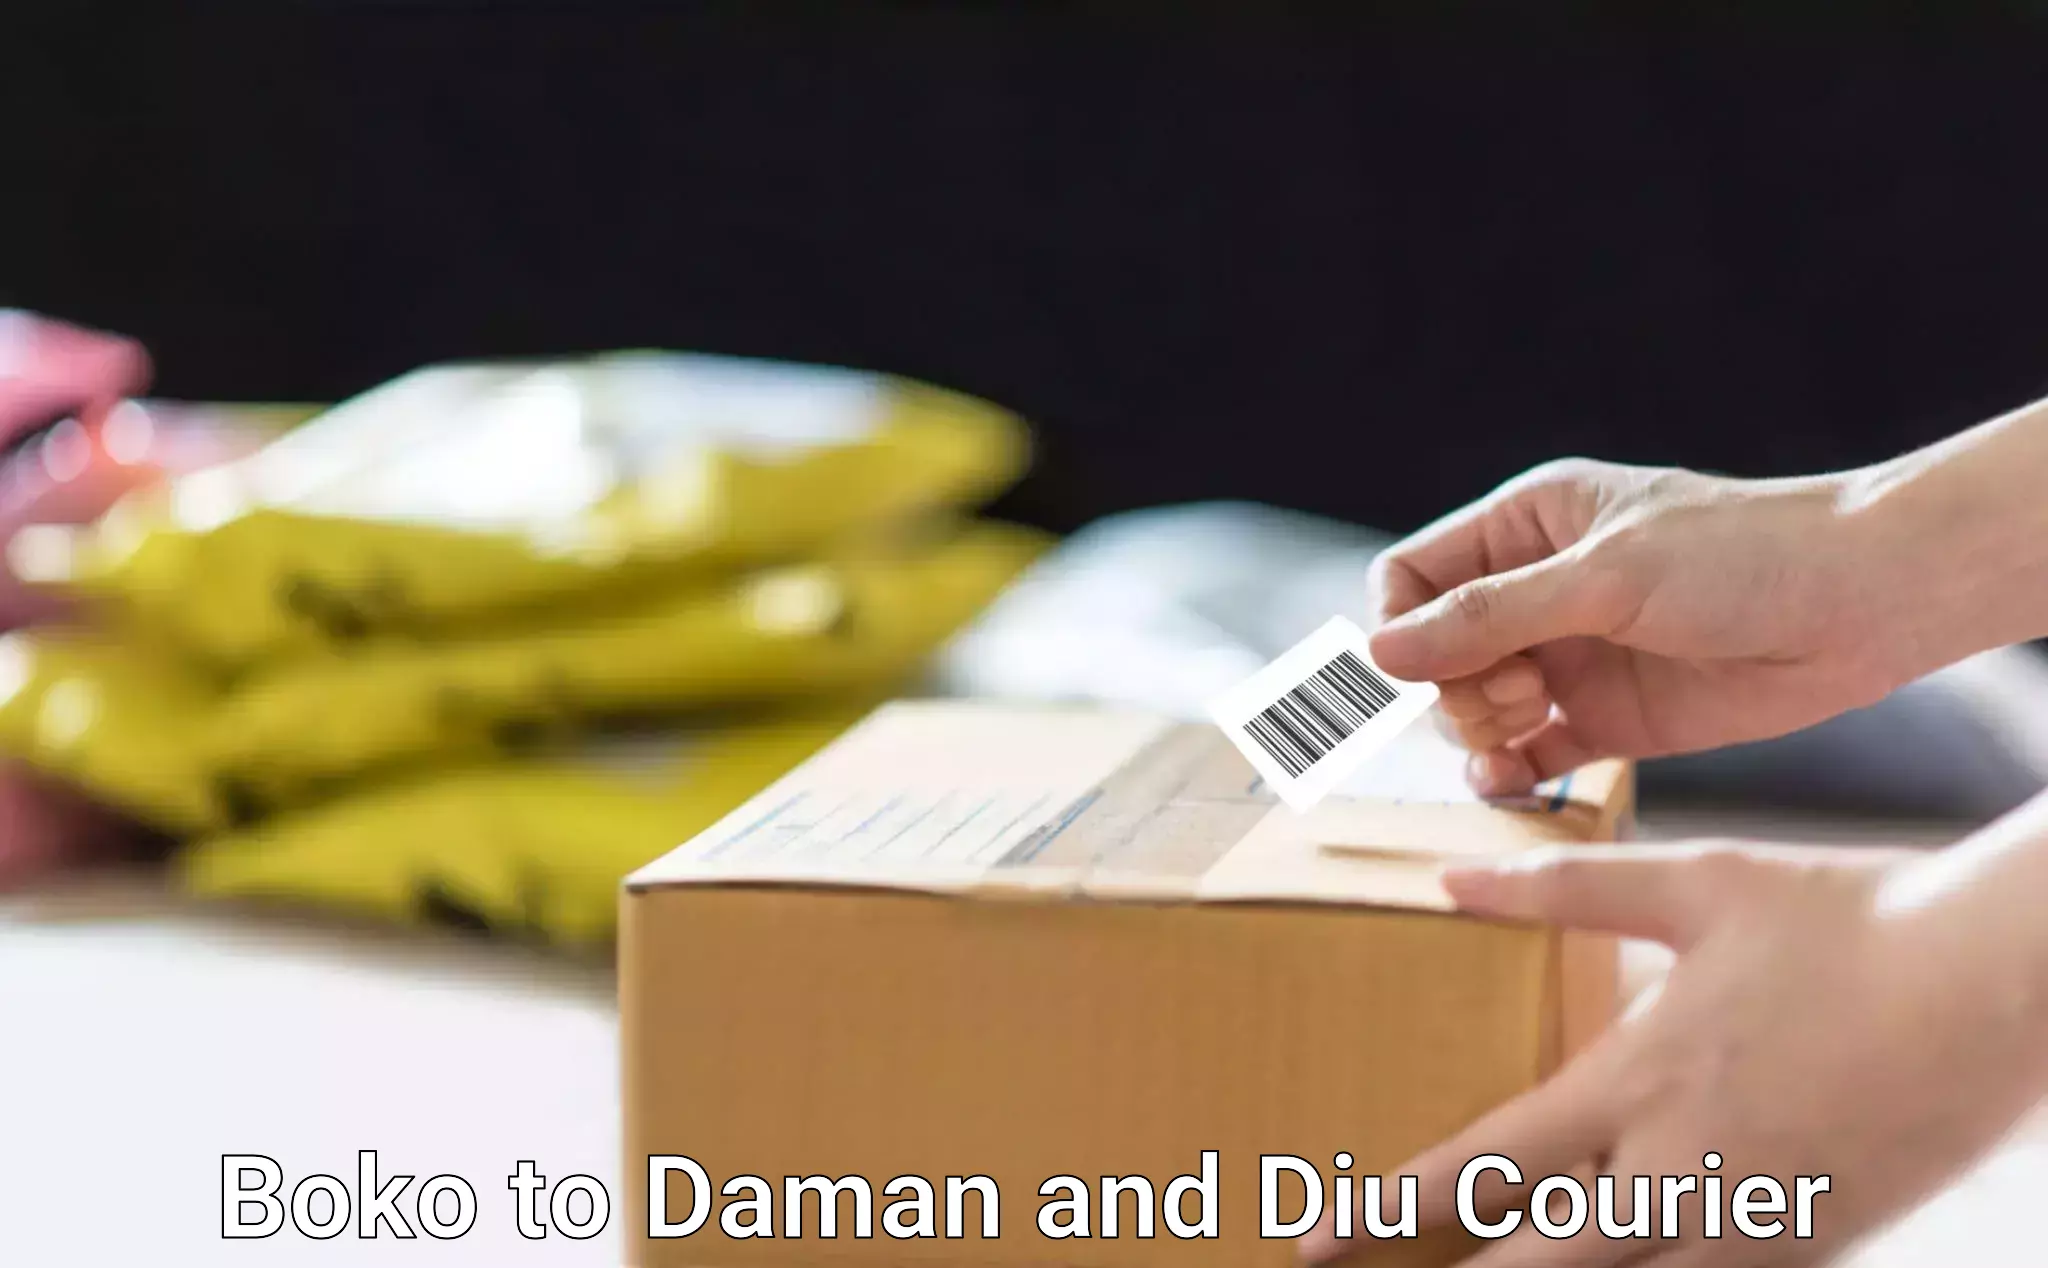 International courier networks Boko to Daman and Diu